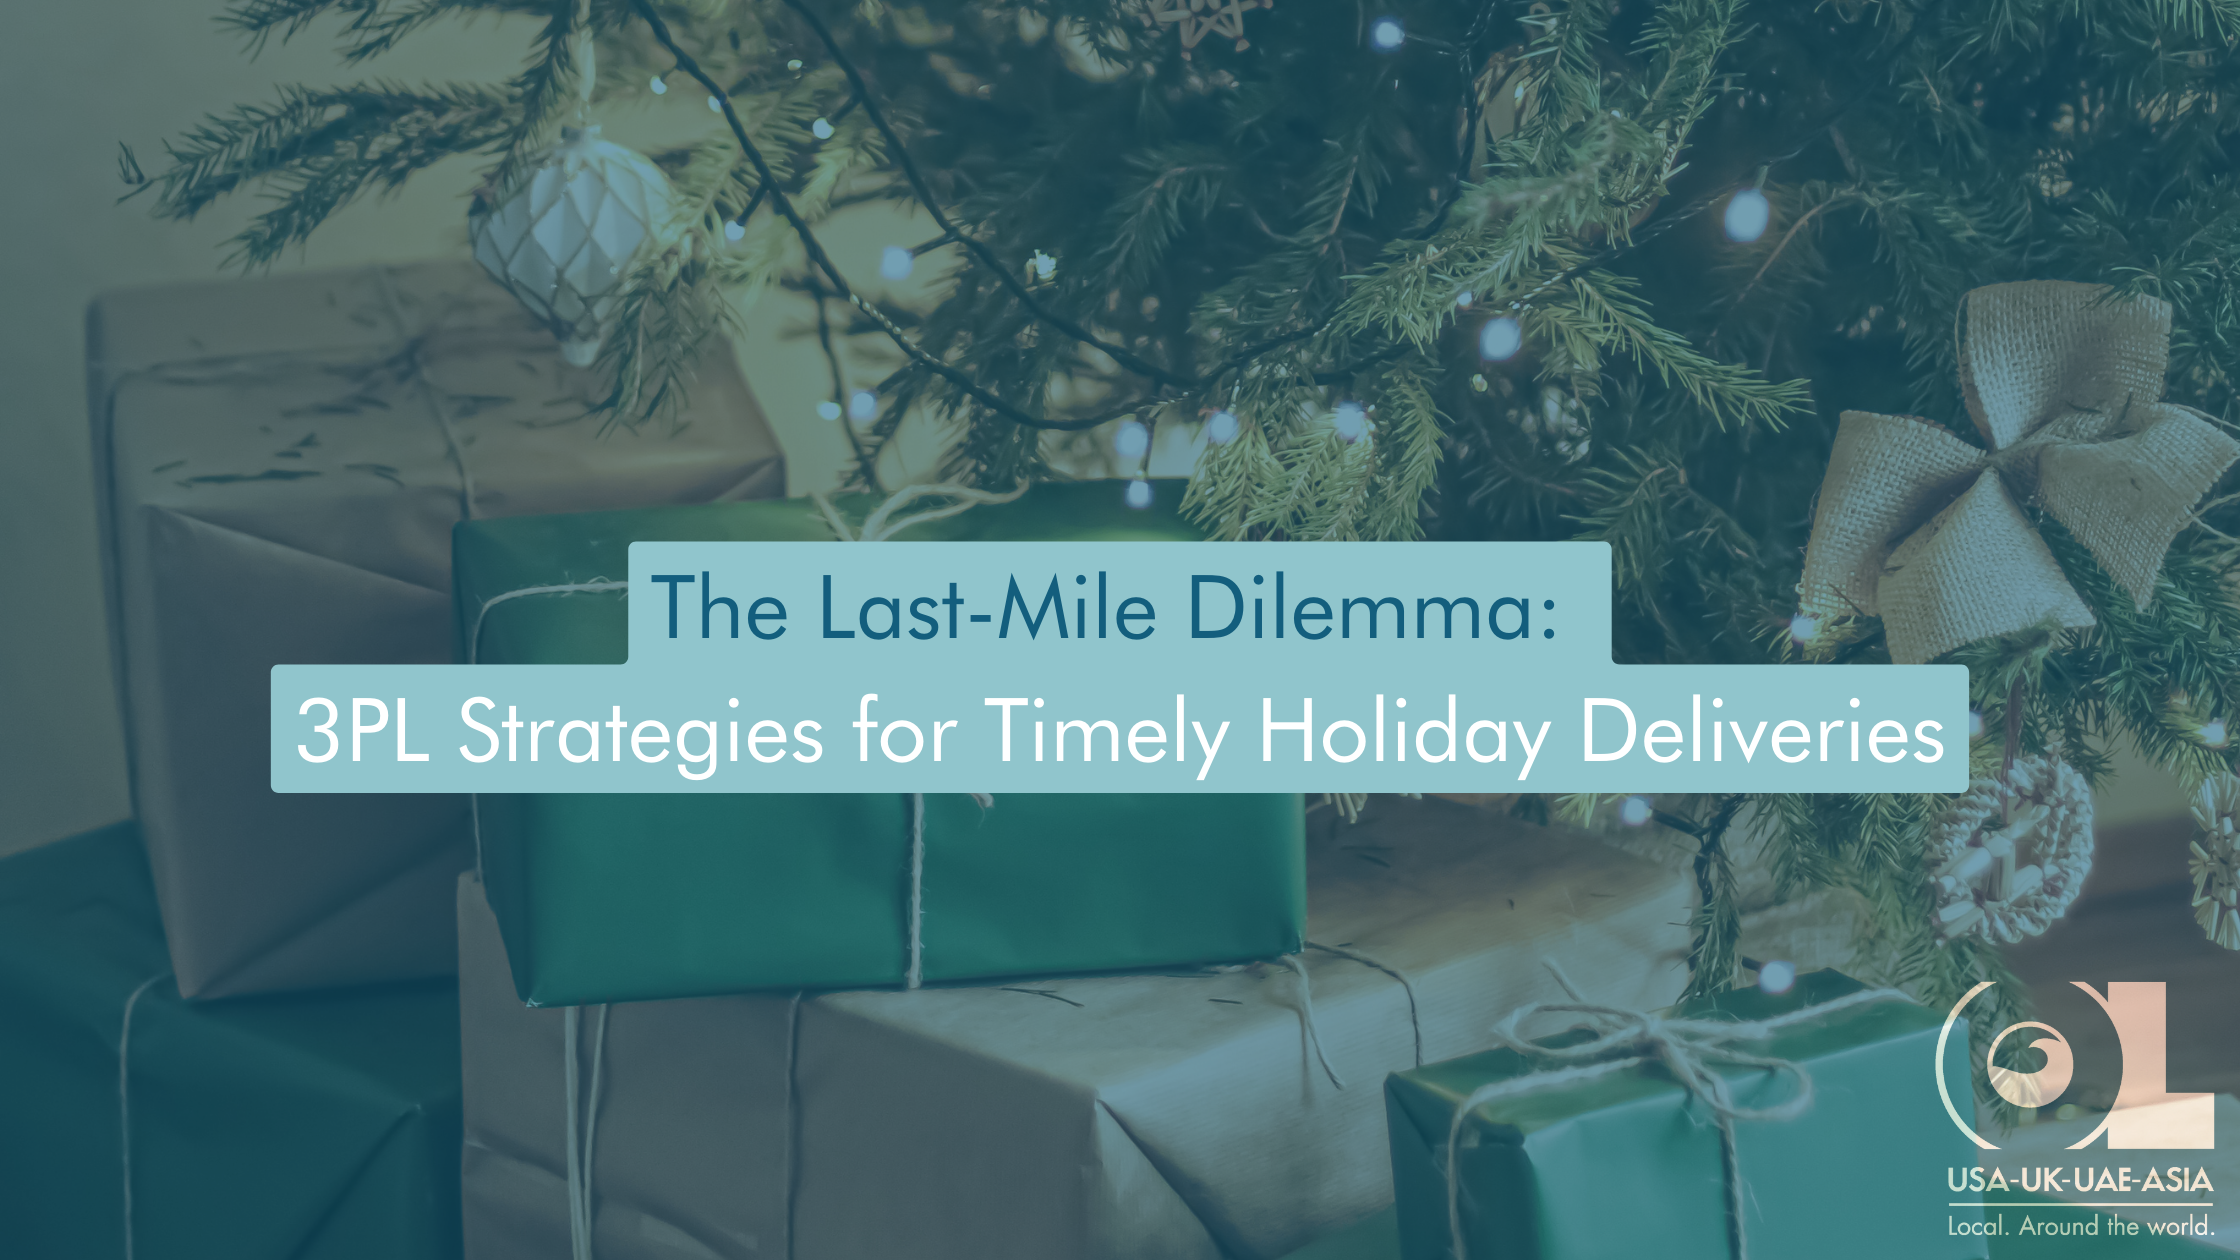 The-Last-Mile-Dilemma-3PL-Strategies-for-Timely-Holiday-Deliveries-OL-USA